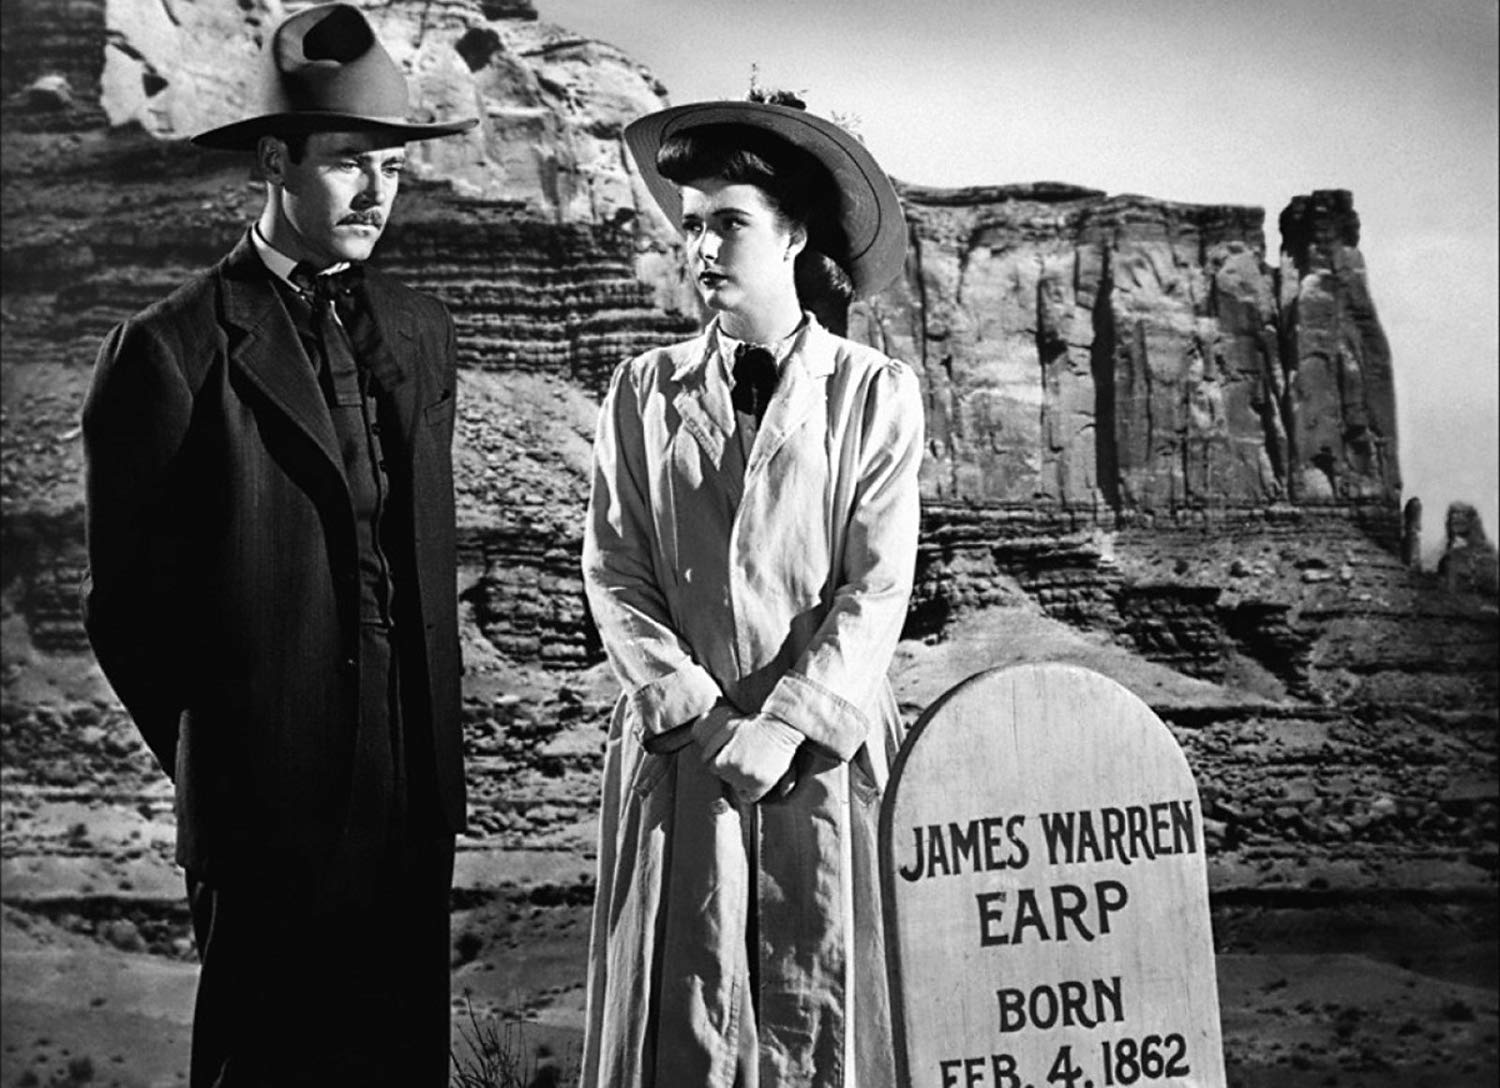 My Darling Clementine Movie Review